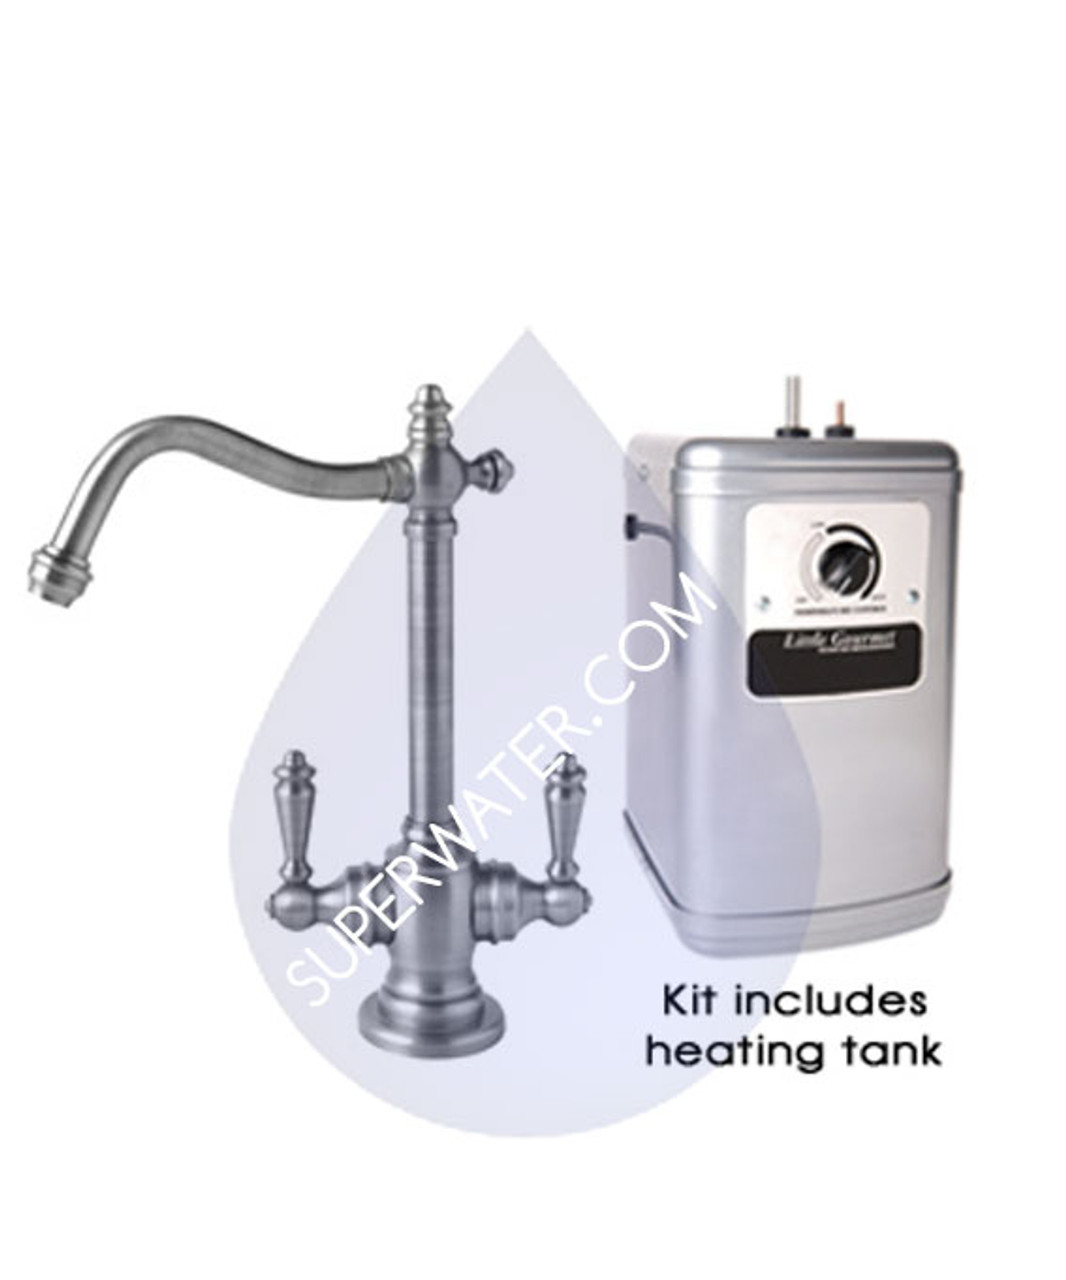 https://cdn11.bigcommerce.com/s-ci85fda5to/images/stencil/1280x1280/products/1564/1624/mt1101-diy-mountain-instant-hot-and-cold-water-dispenser-kit-mt1101diy-23__30823.1629388784.jpg?c=1